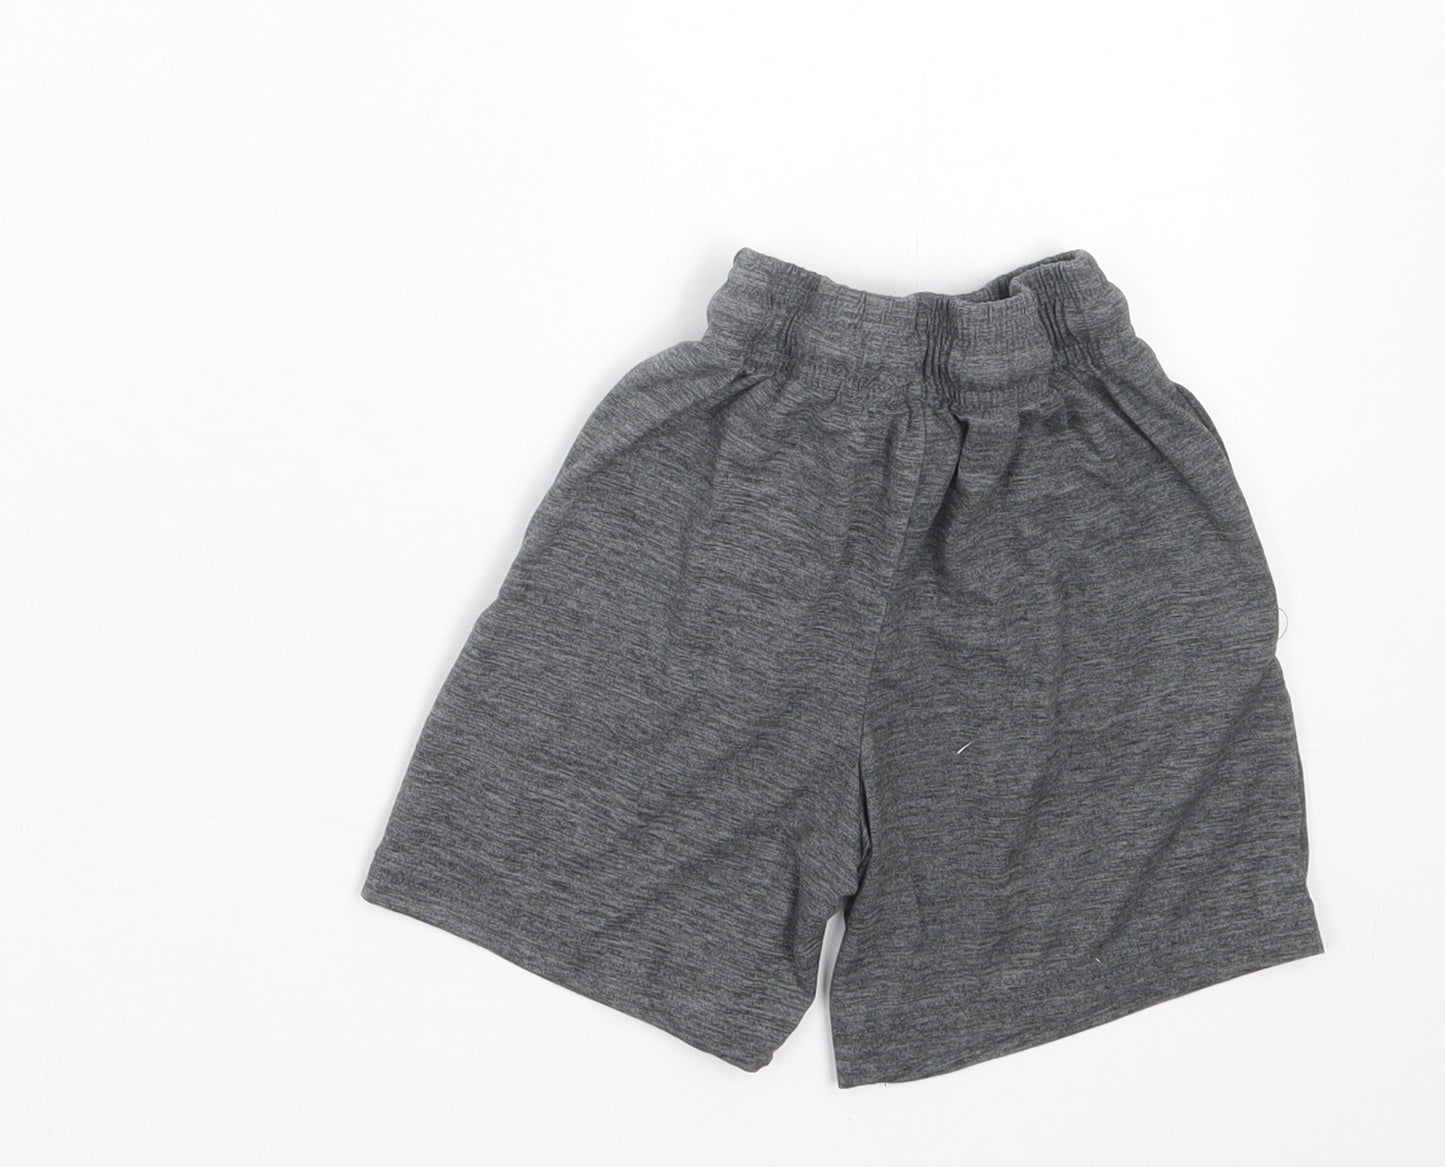 Dunnes Stores Boys Grey Polyester Sweat Shorts Size 4-5 Years Regular Tie